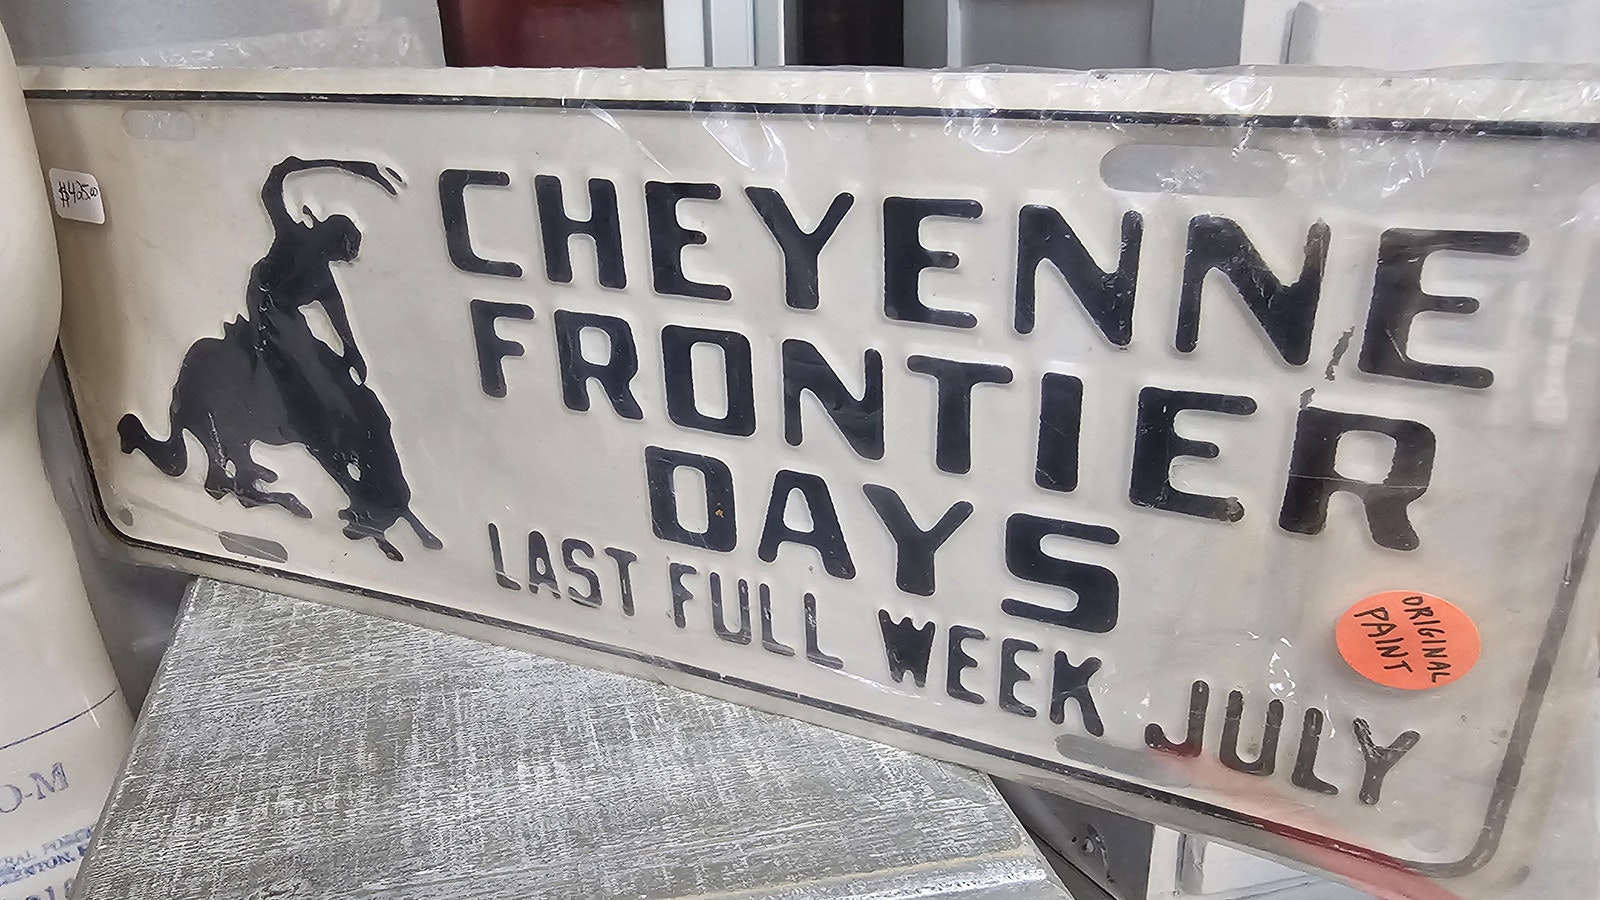 Cheyenne Frontier Days plates were produced through the 1960s, but then were stopped, making them highly collectible.